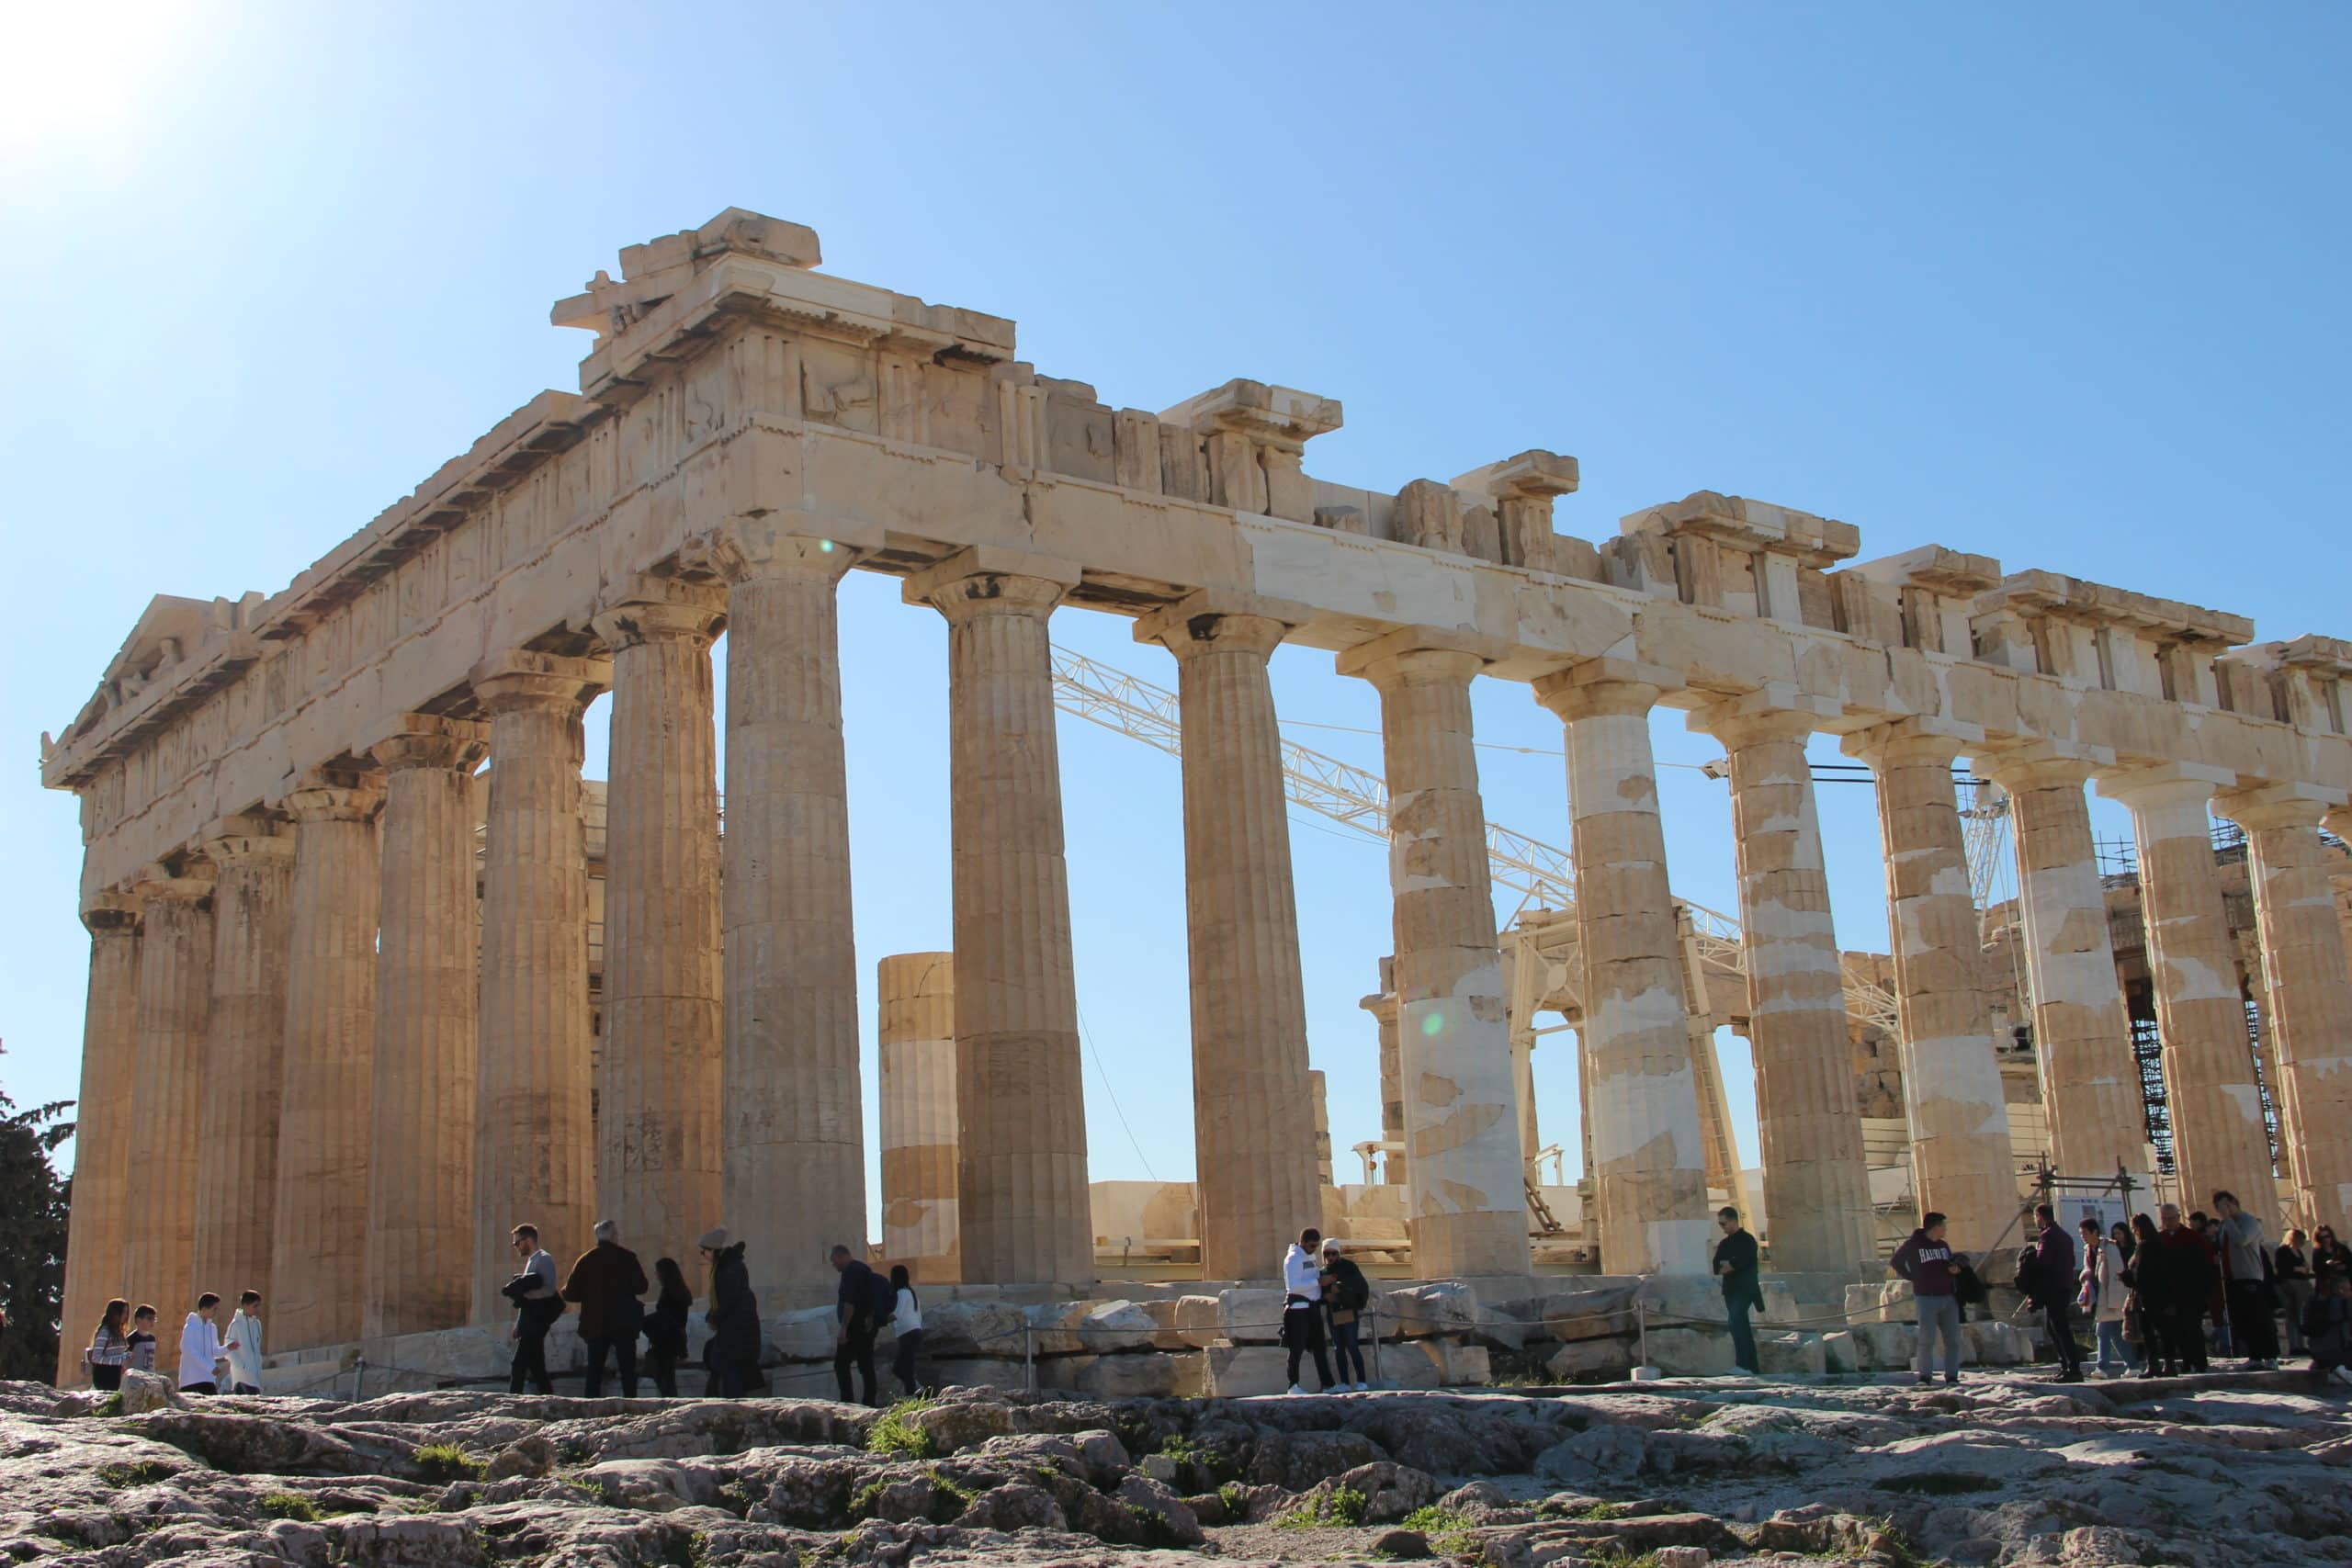 Who destroyed the Parthenon? Who sadly bombed it?